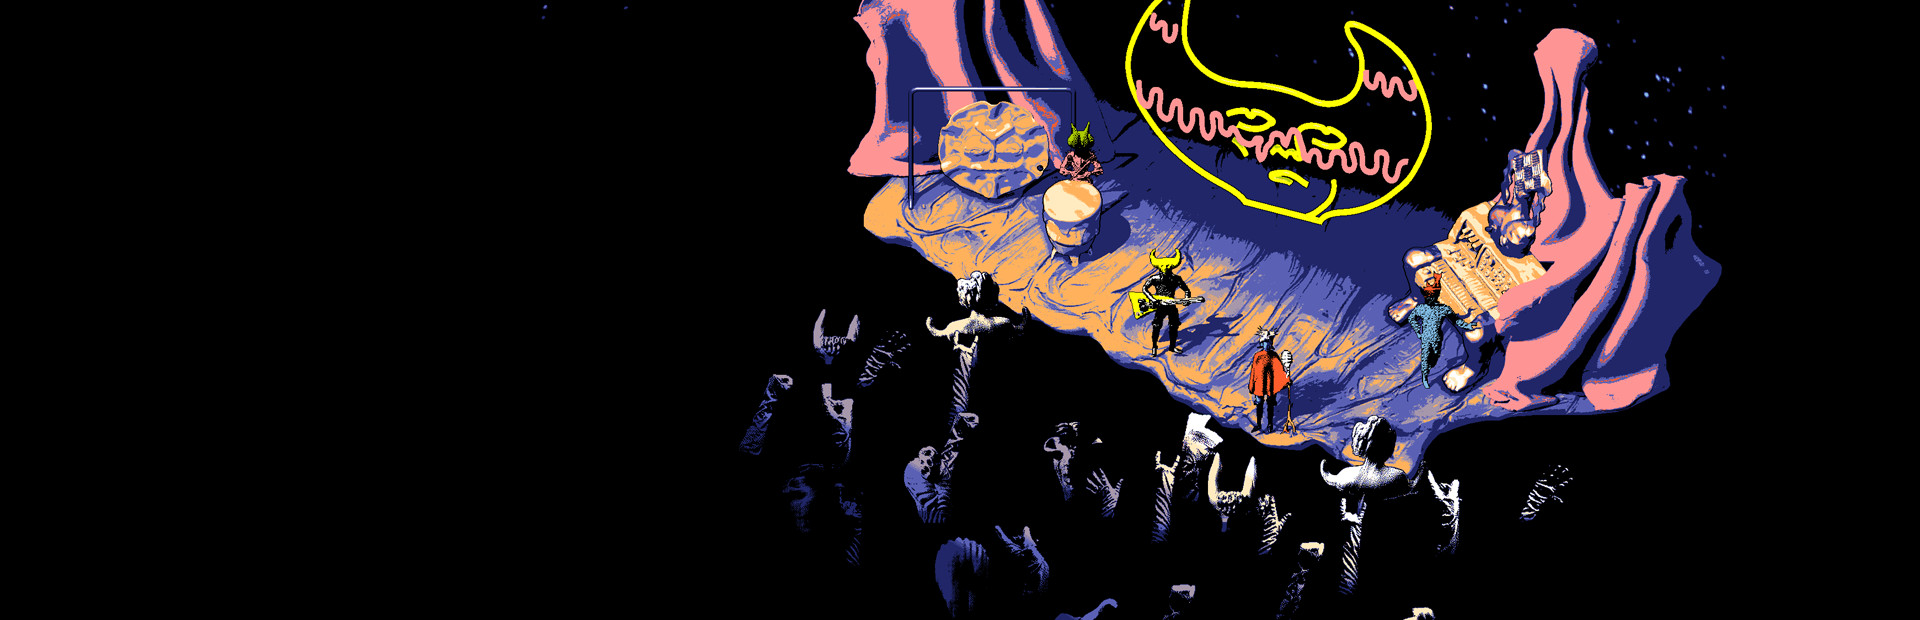 Hylics 2 cover image